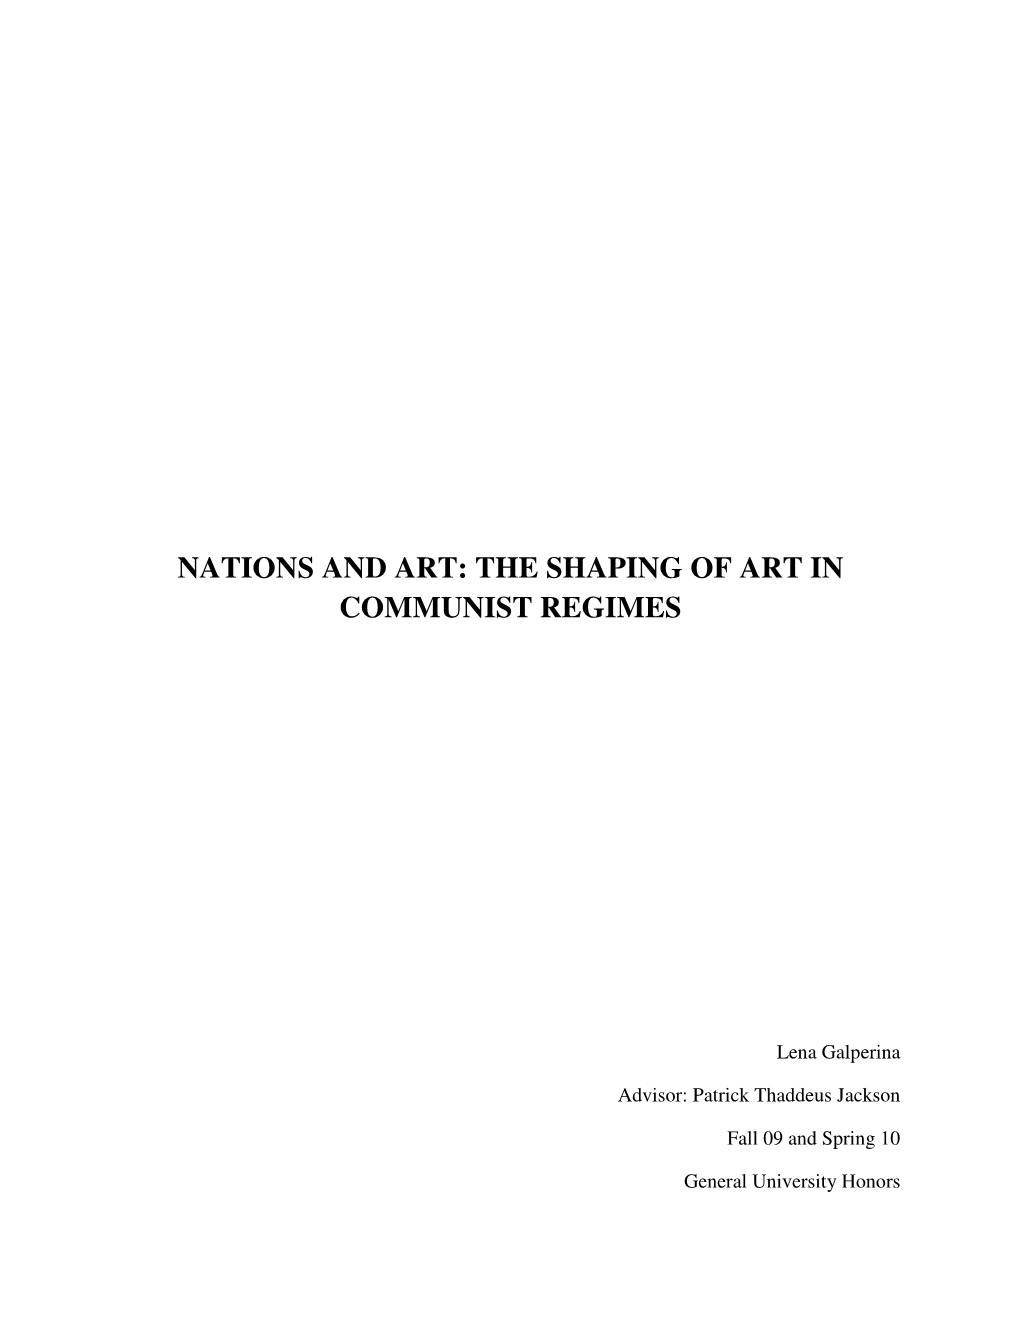 Nations and Art: the Shaping of Art in Communist Regimes